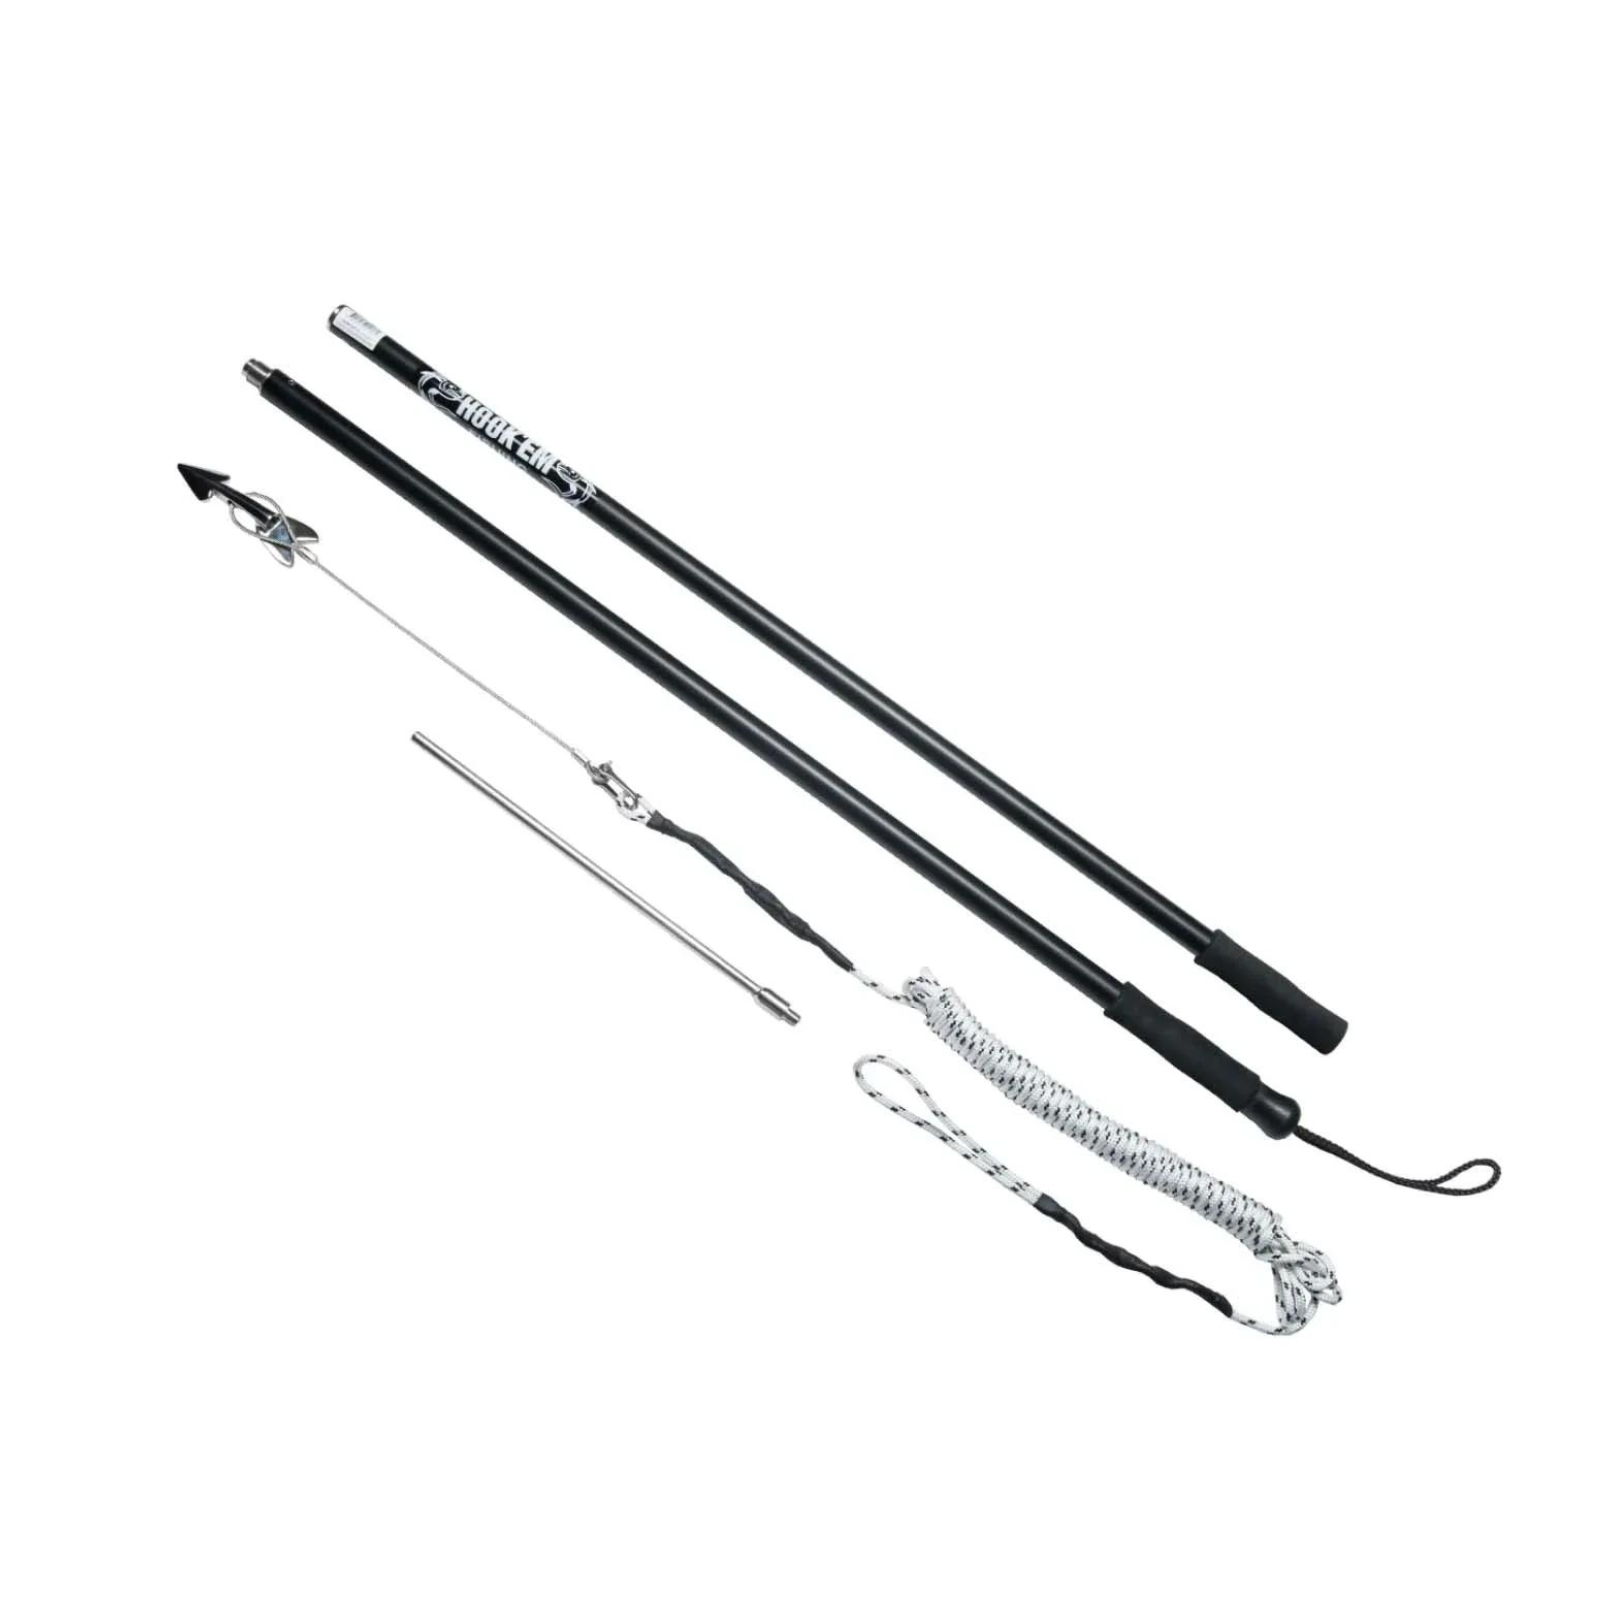 Harpoon SET with 2m/2pce Pole & Accessories